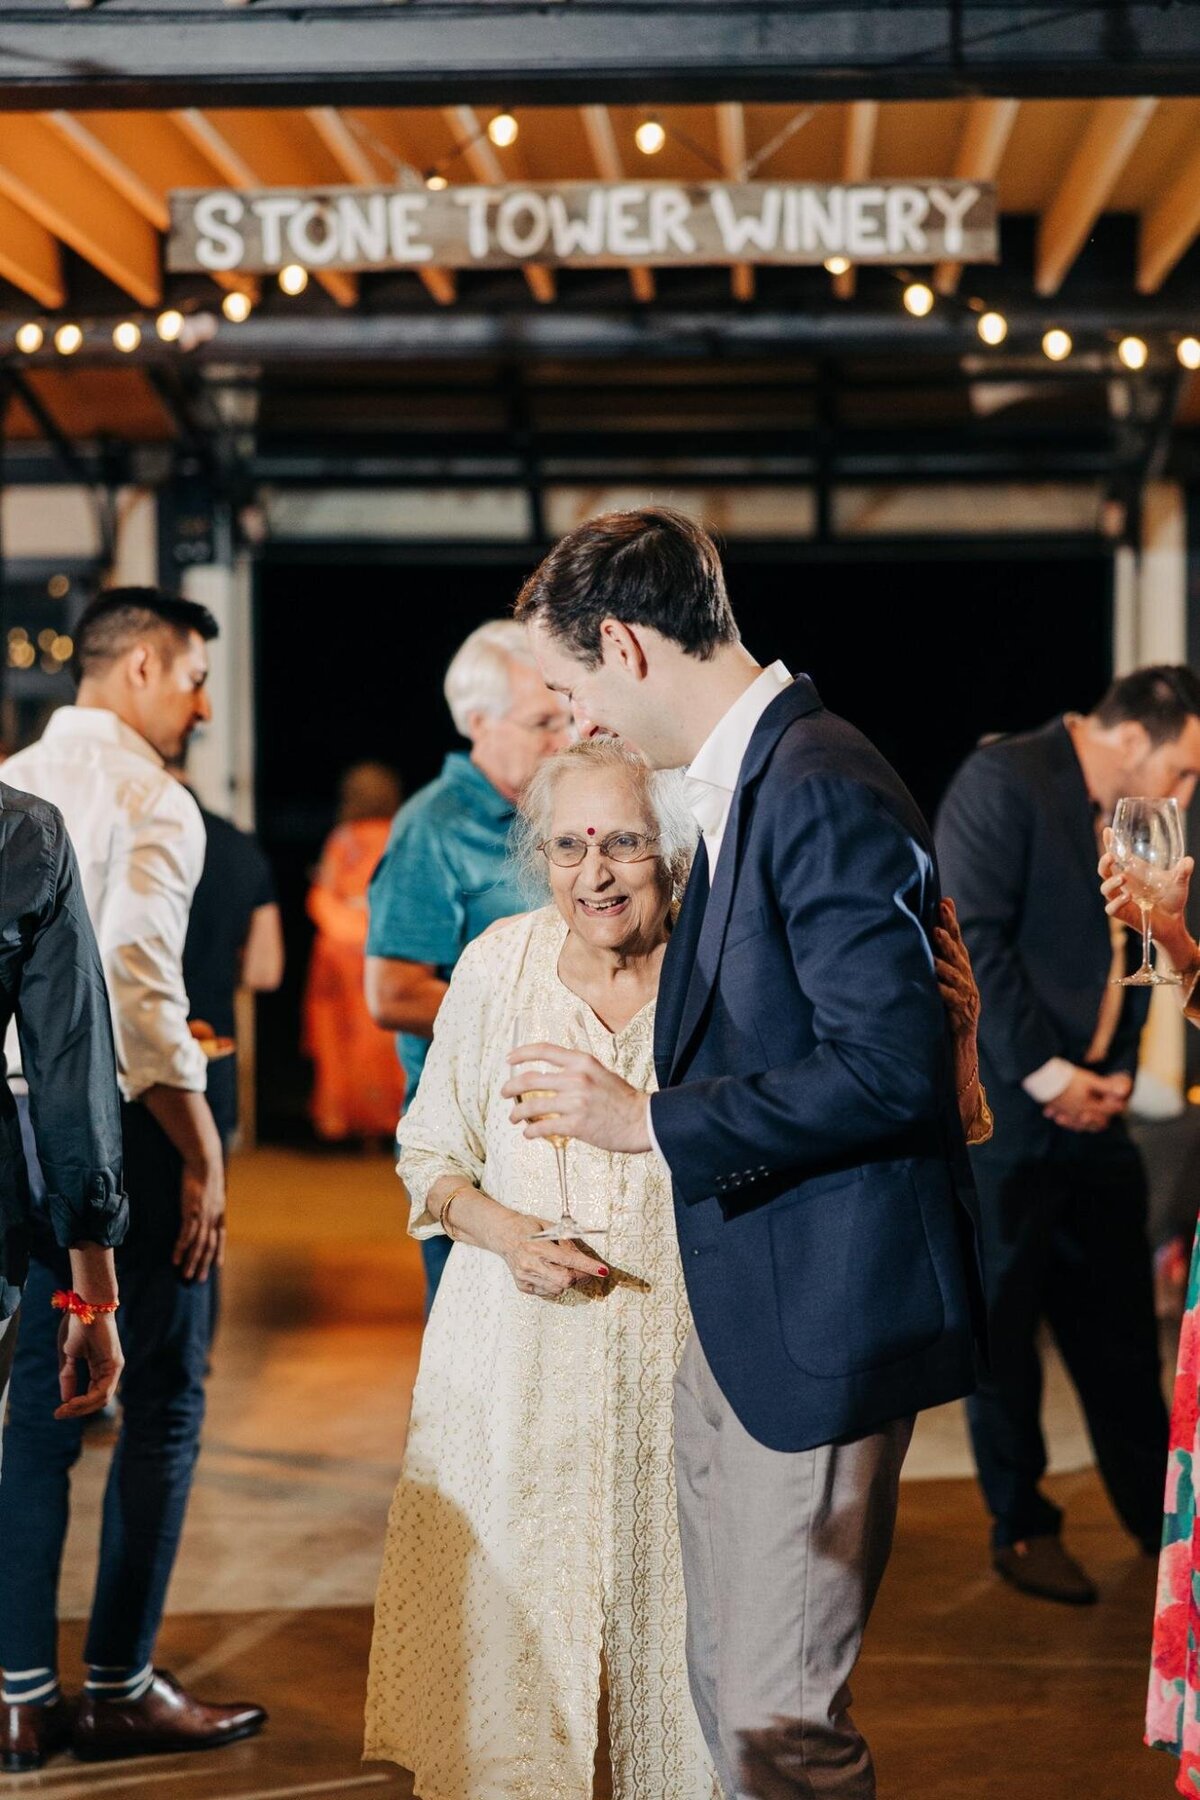 A young man gently hugs an elderly woman at a social gathering in a winery, both smiling warmly.